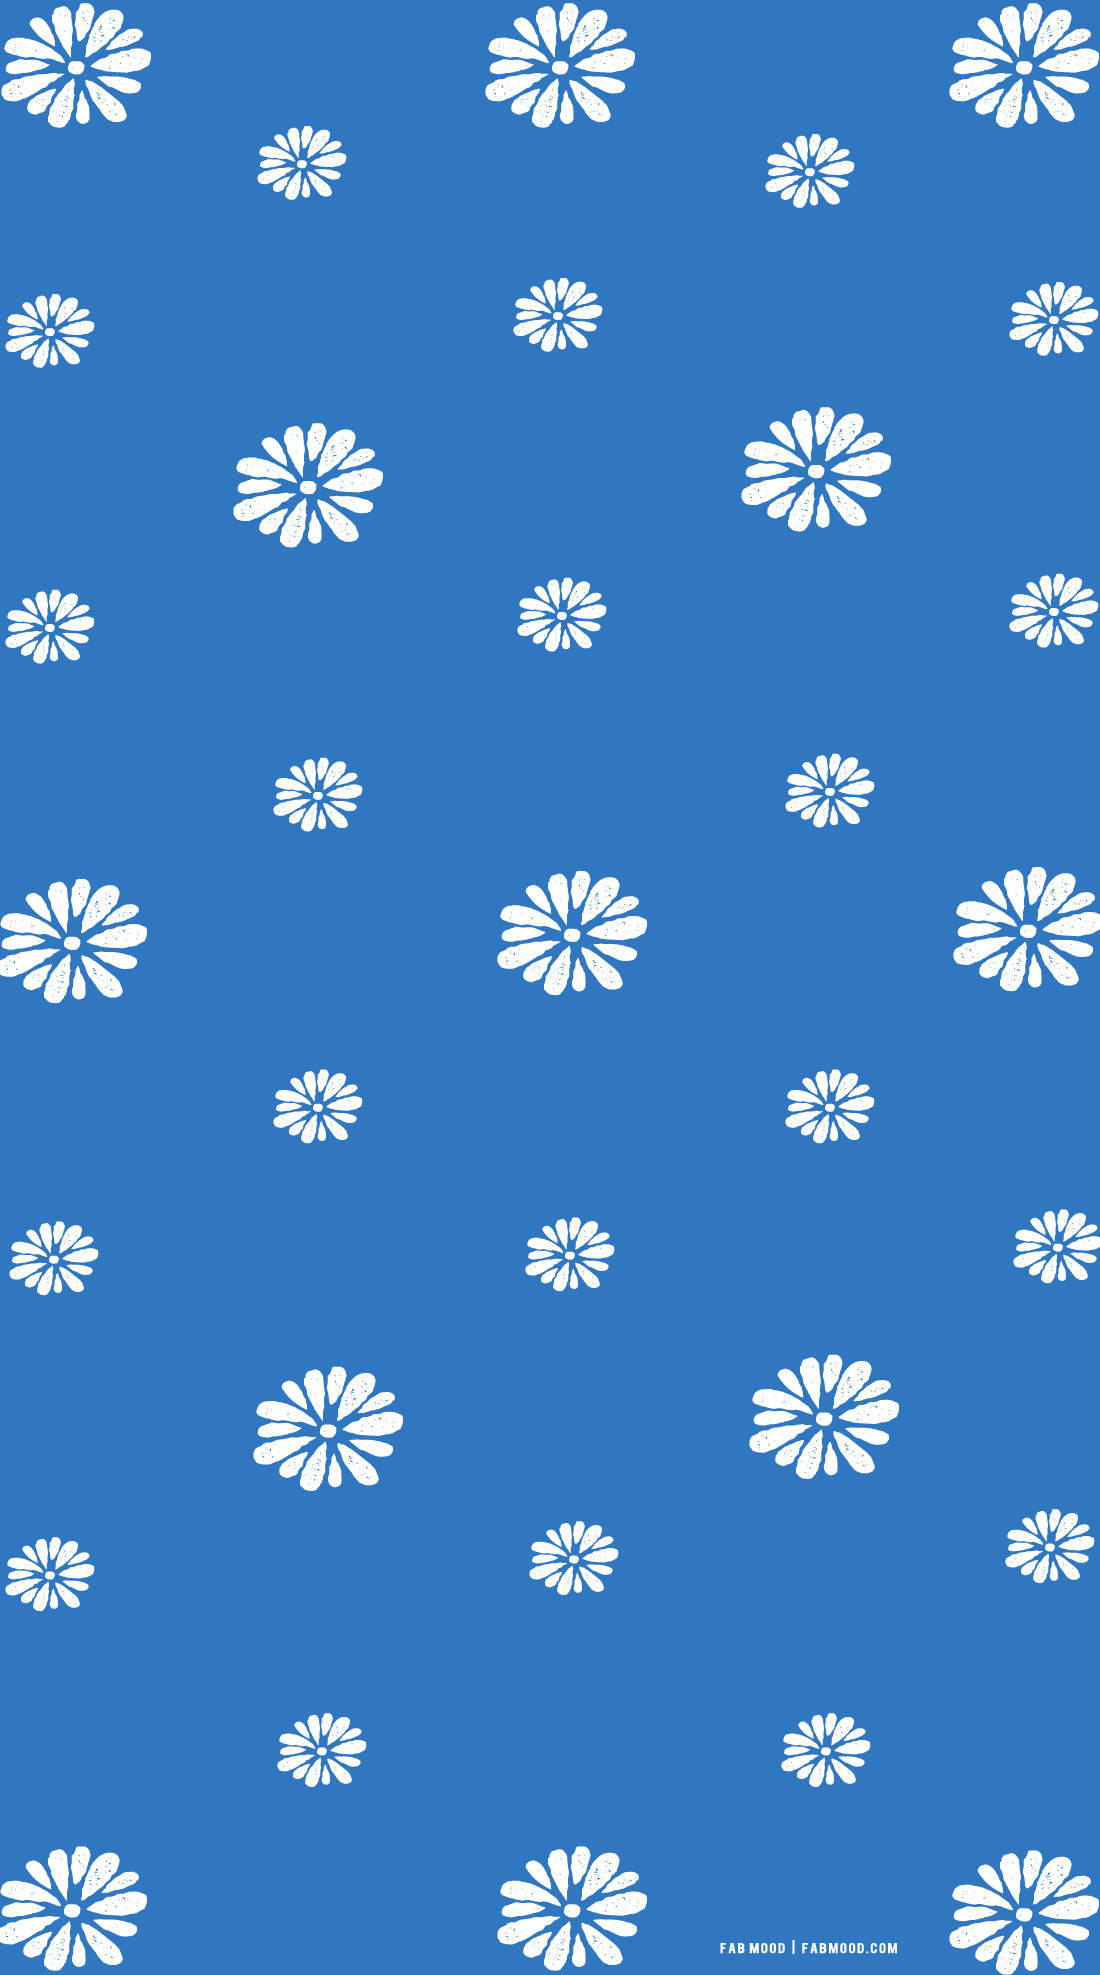 15 Azure Blue Wallpapers For Phone : Daisy Illustration Blue Blackground